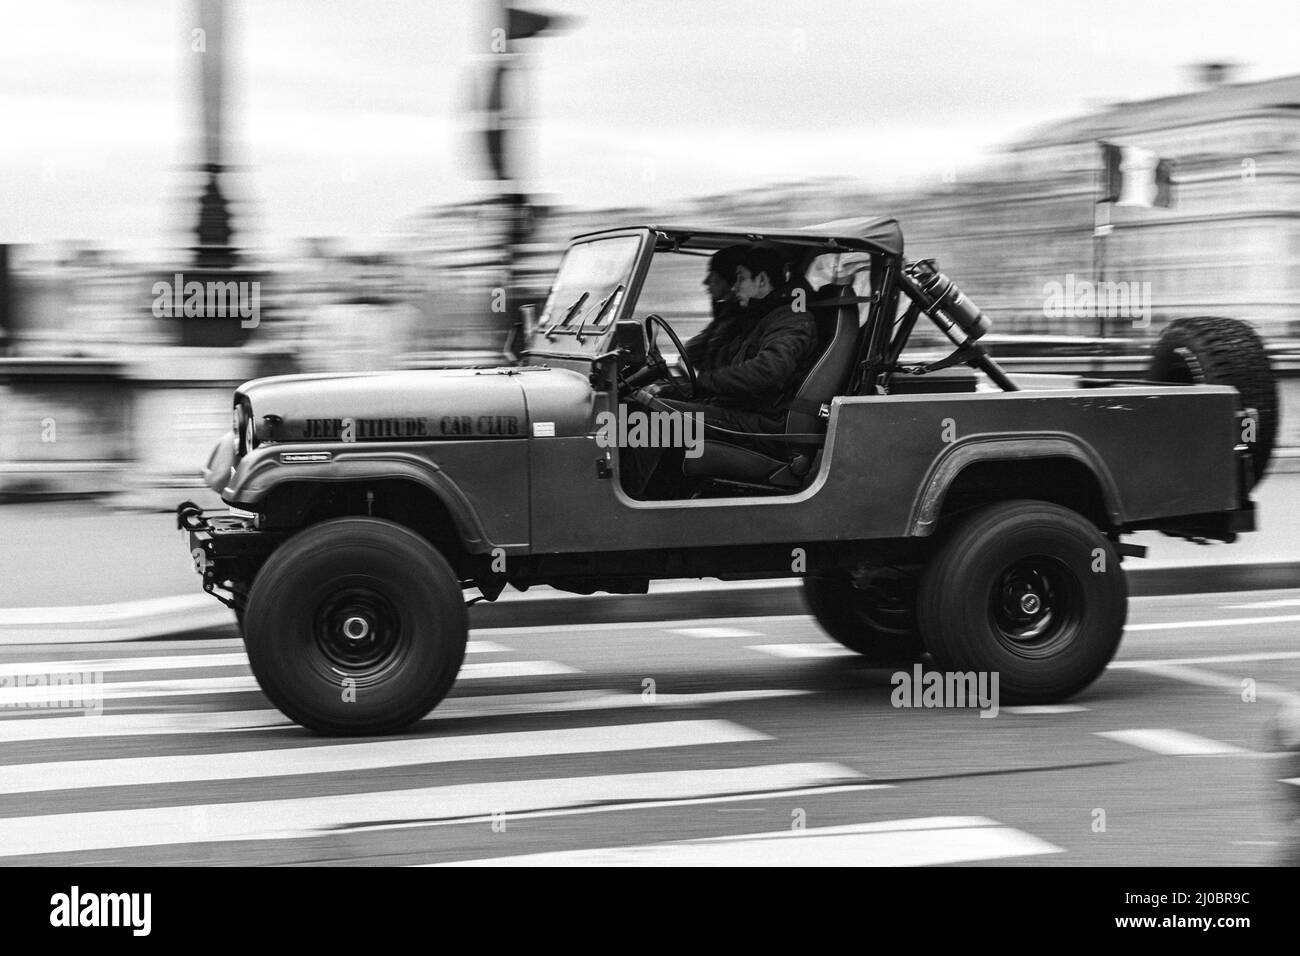 Old American off road truck on the city street with blurred background Stock Photo